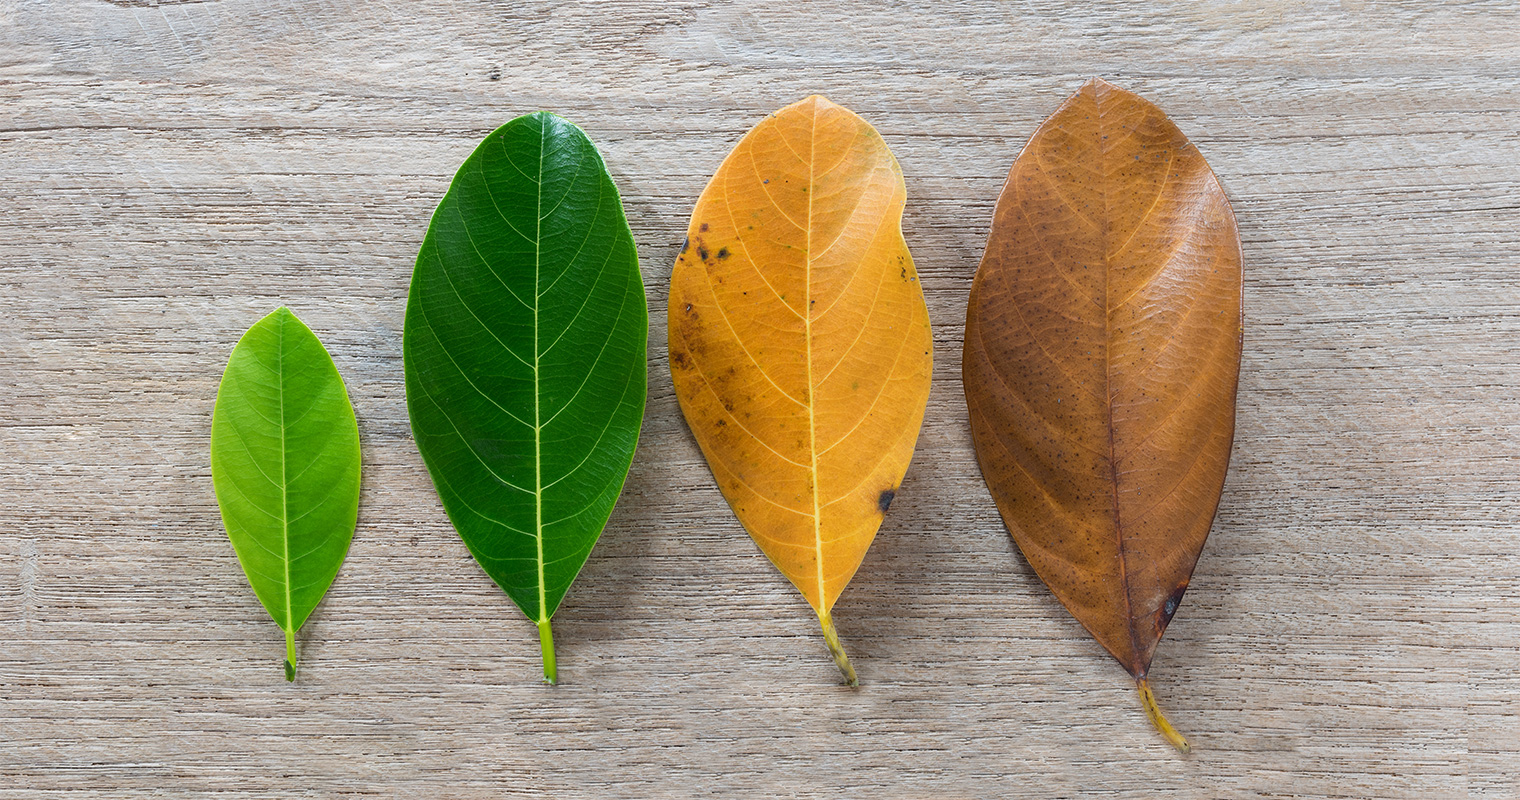 aging of life shown through the different color of leaf in different season